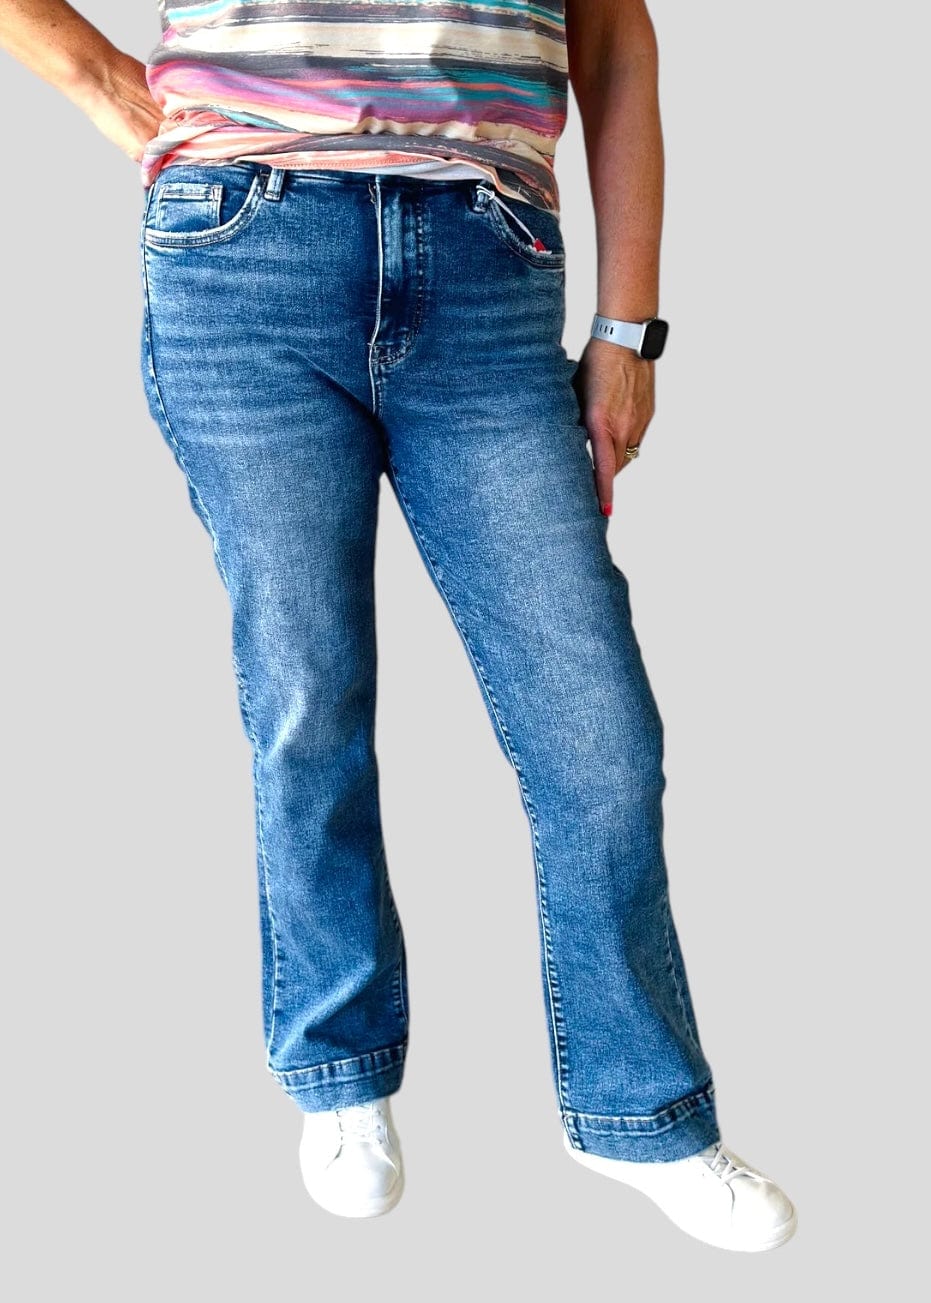 Protege HR Bootcut Flying Monkey Jeans Jeans